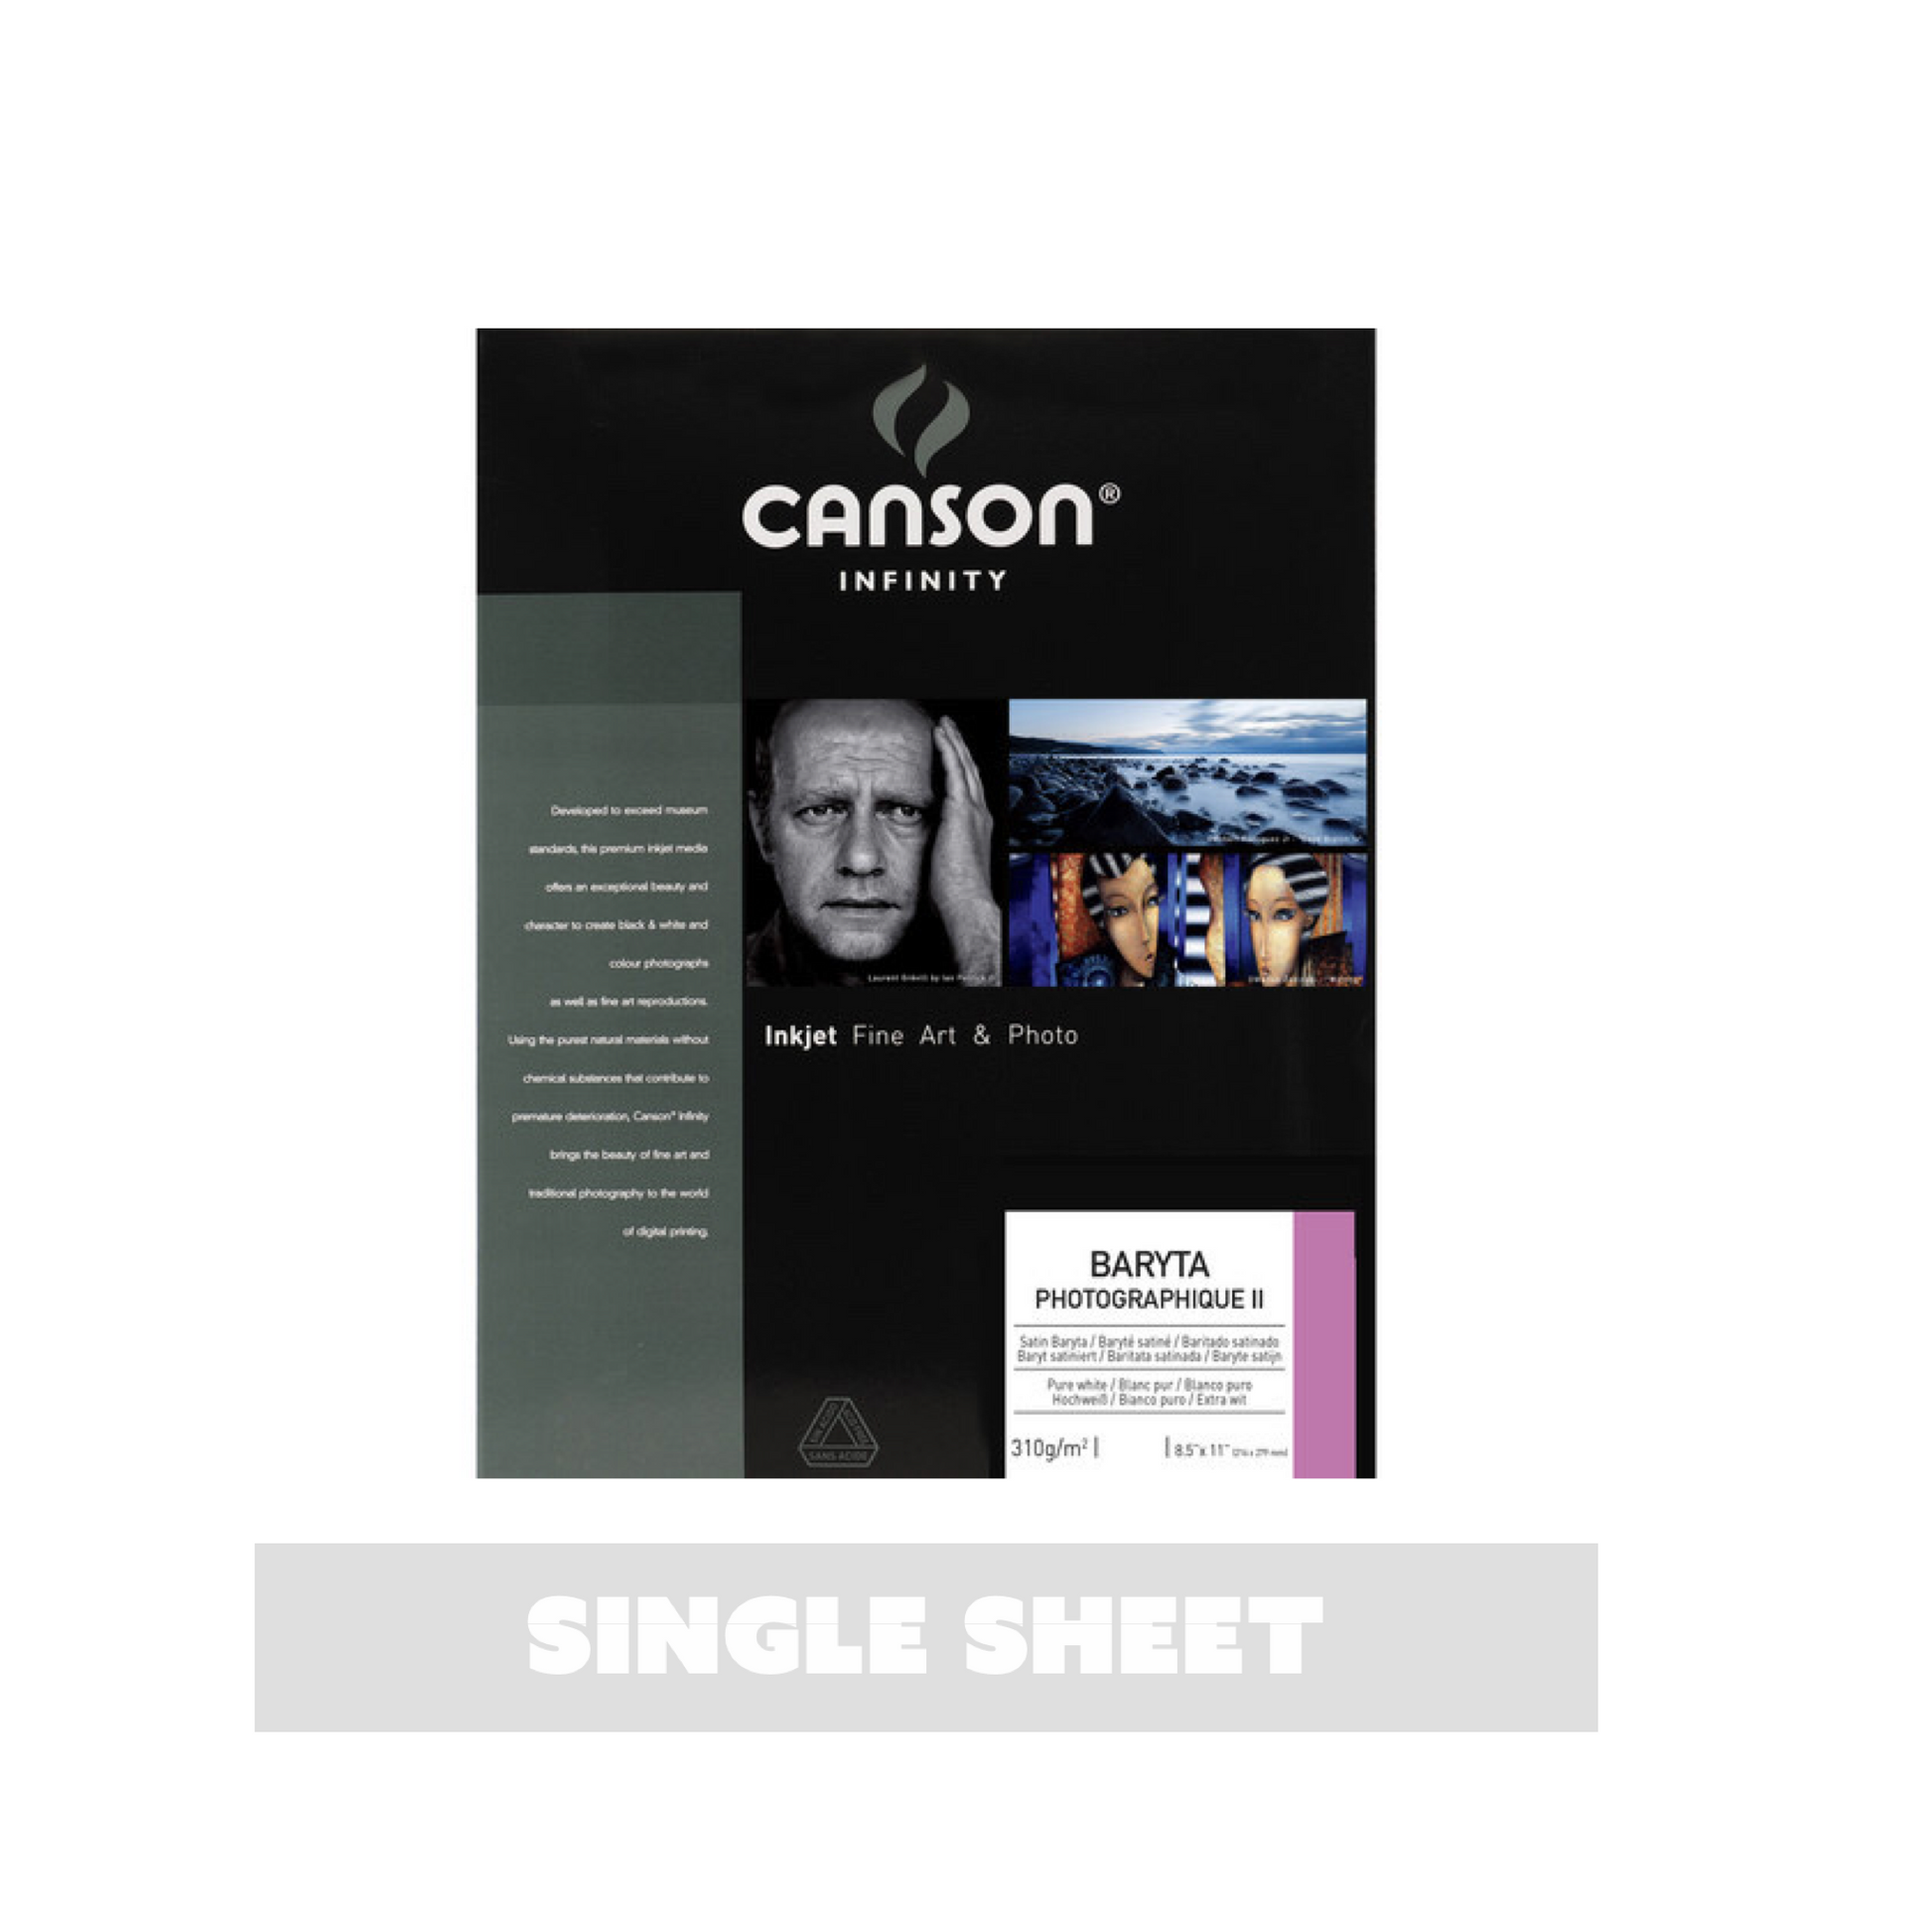 Canson Infinity Baryta Photographique Printer Paper - Single Sheet - 8.5 x 11 inches by Canson - K. A. Artist Shop